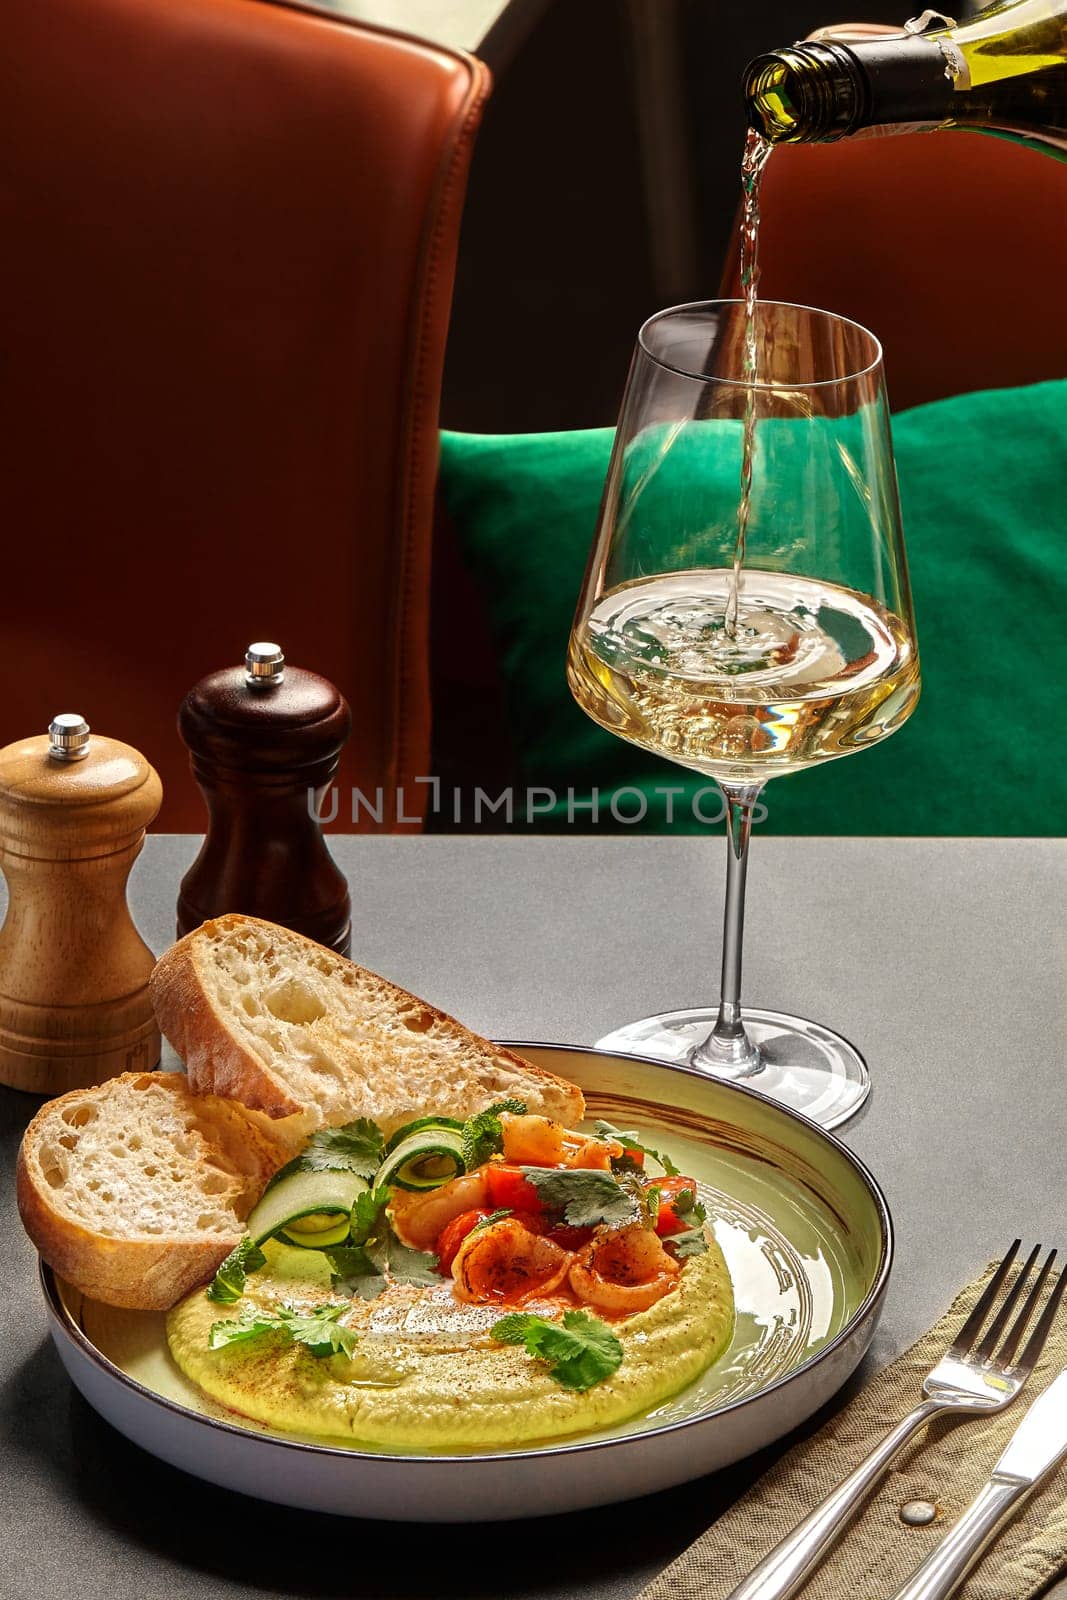 Pouring wine for gourmet hummus with shrimp and greens by nazarovsergey